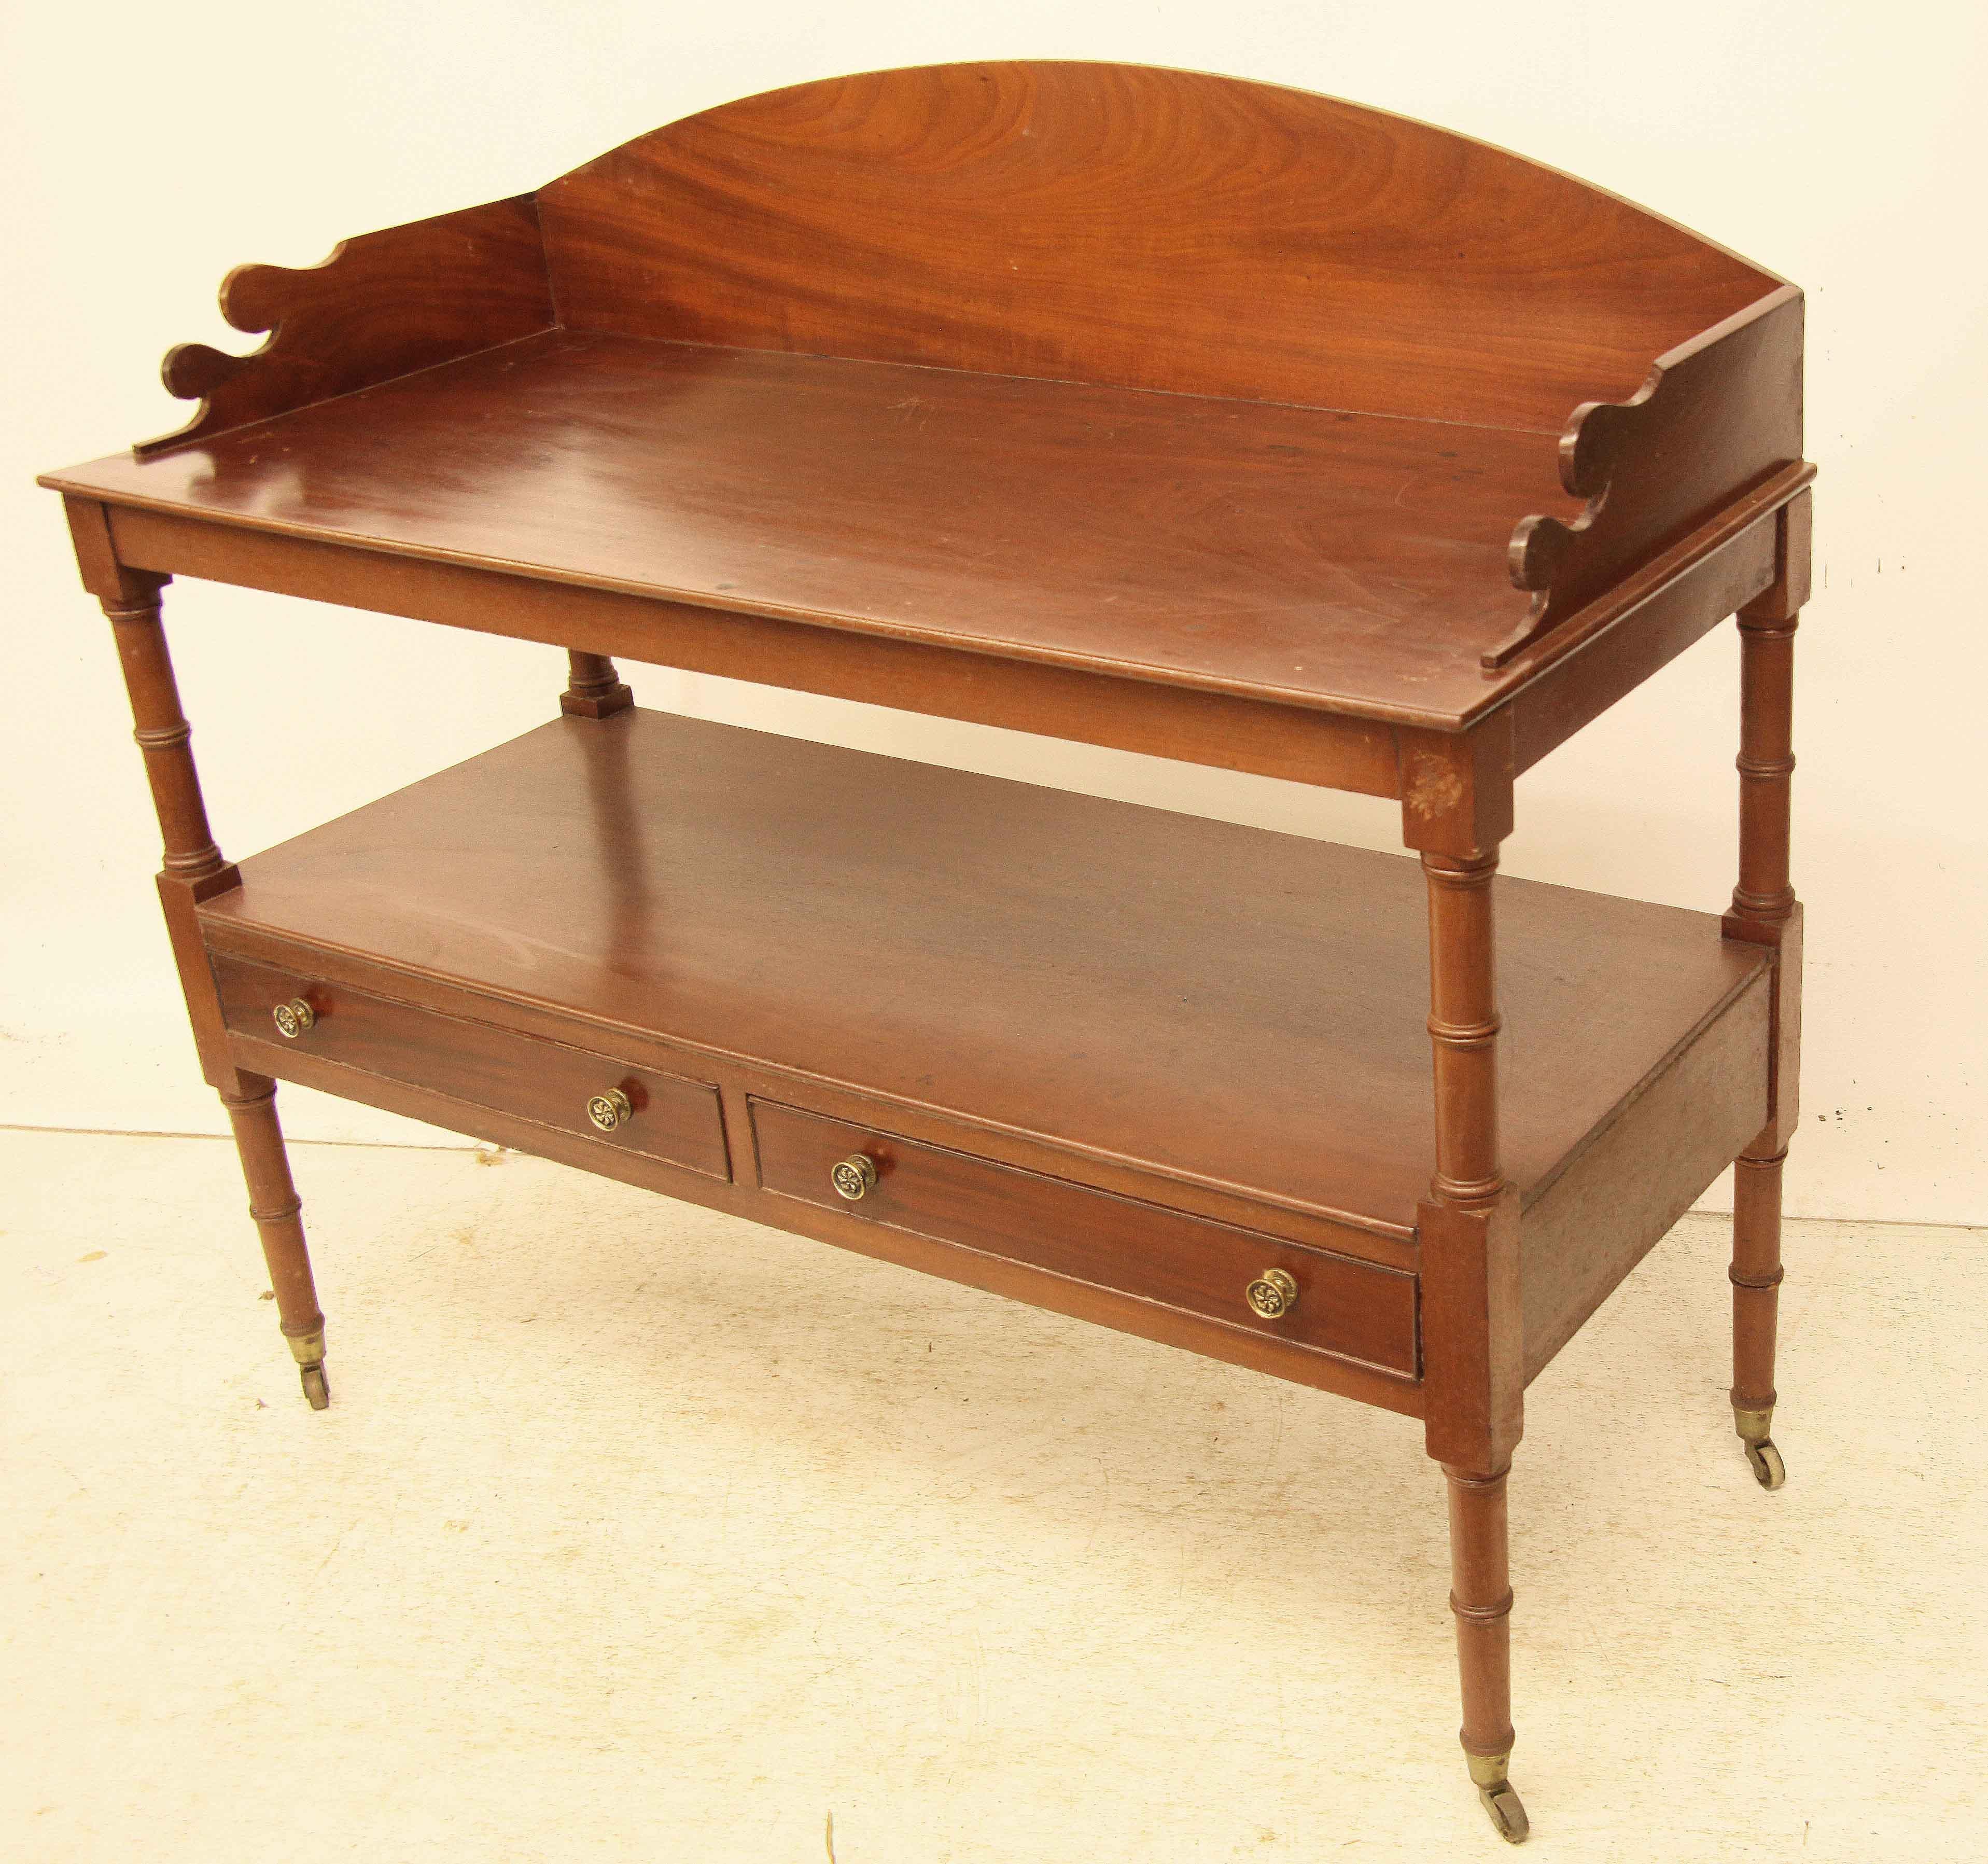 Turned Sheraton Two Drawer Serving Table